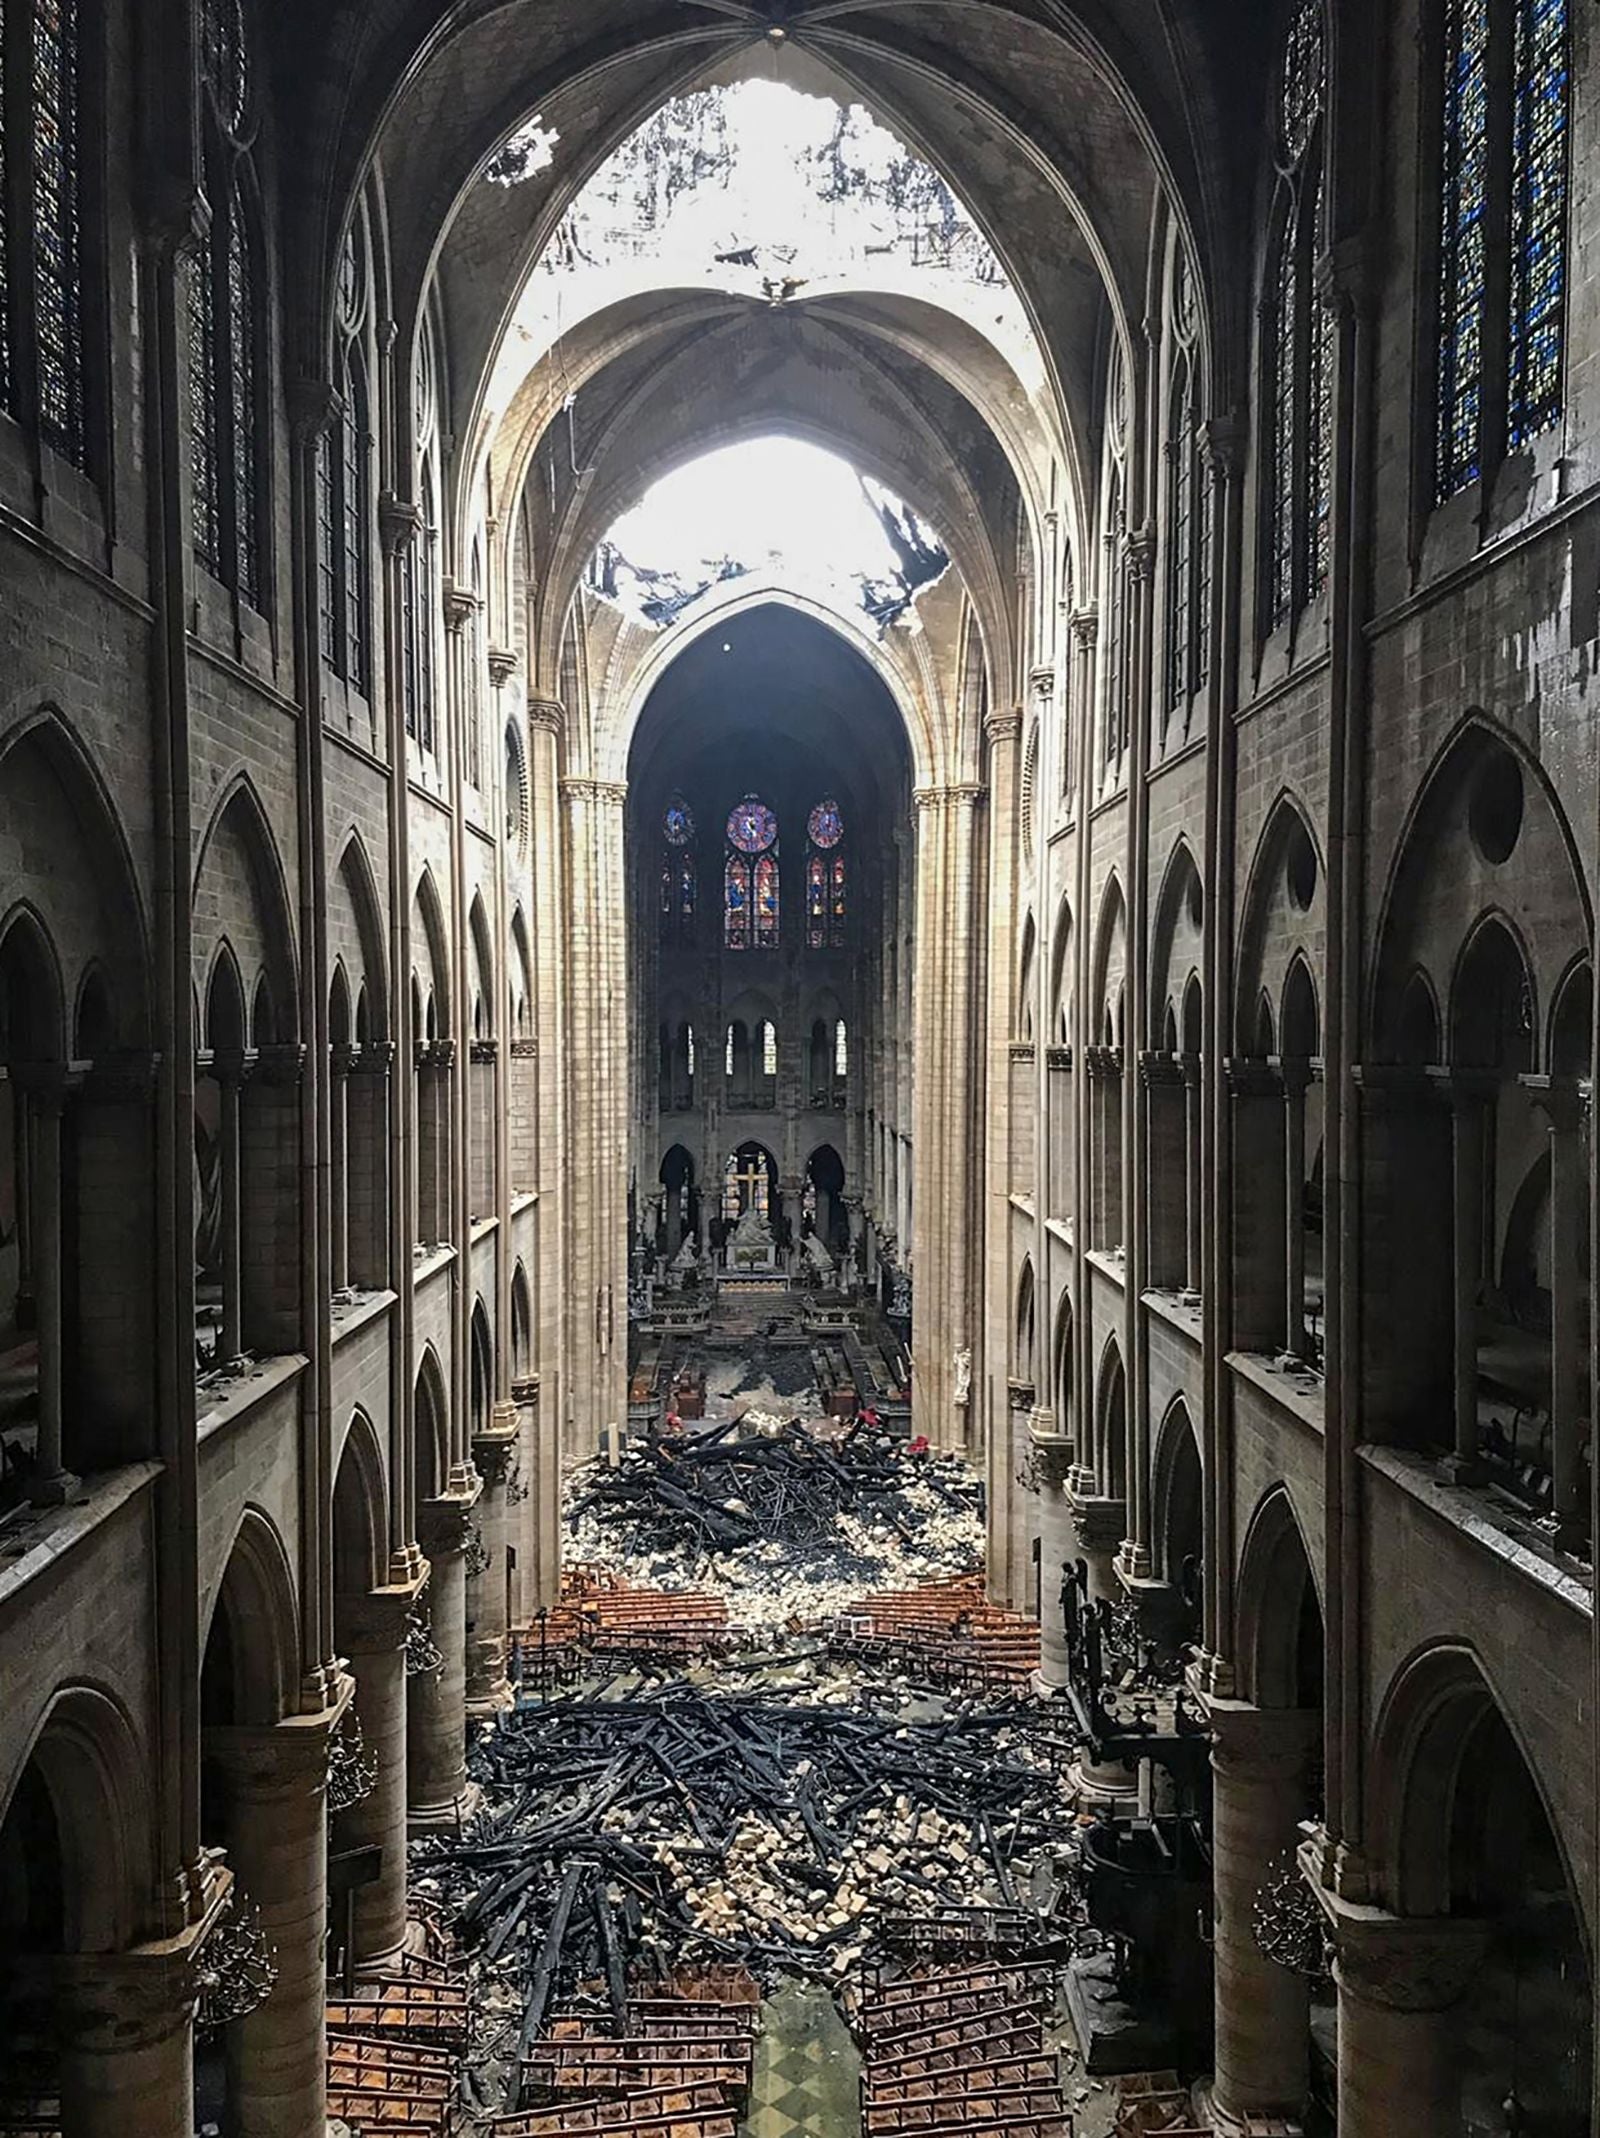 Newly Released Photos Show The Inside Of Notre Dame Cathedral After The Fire - World Of Buzz 2